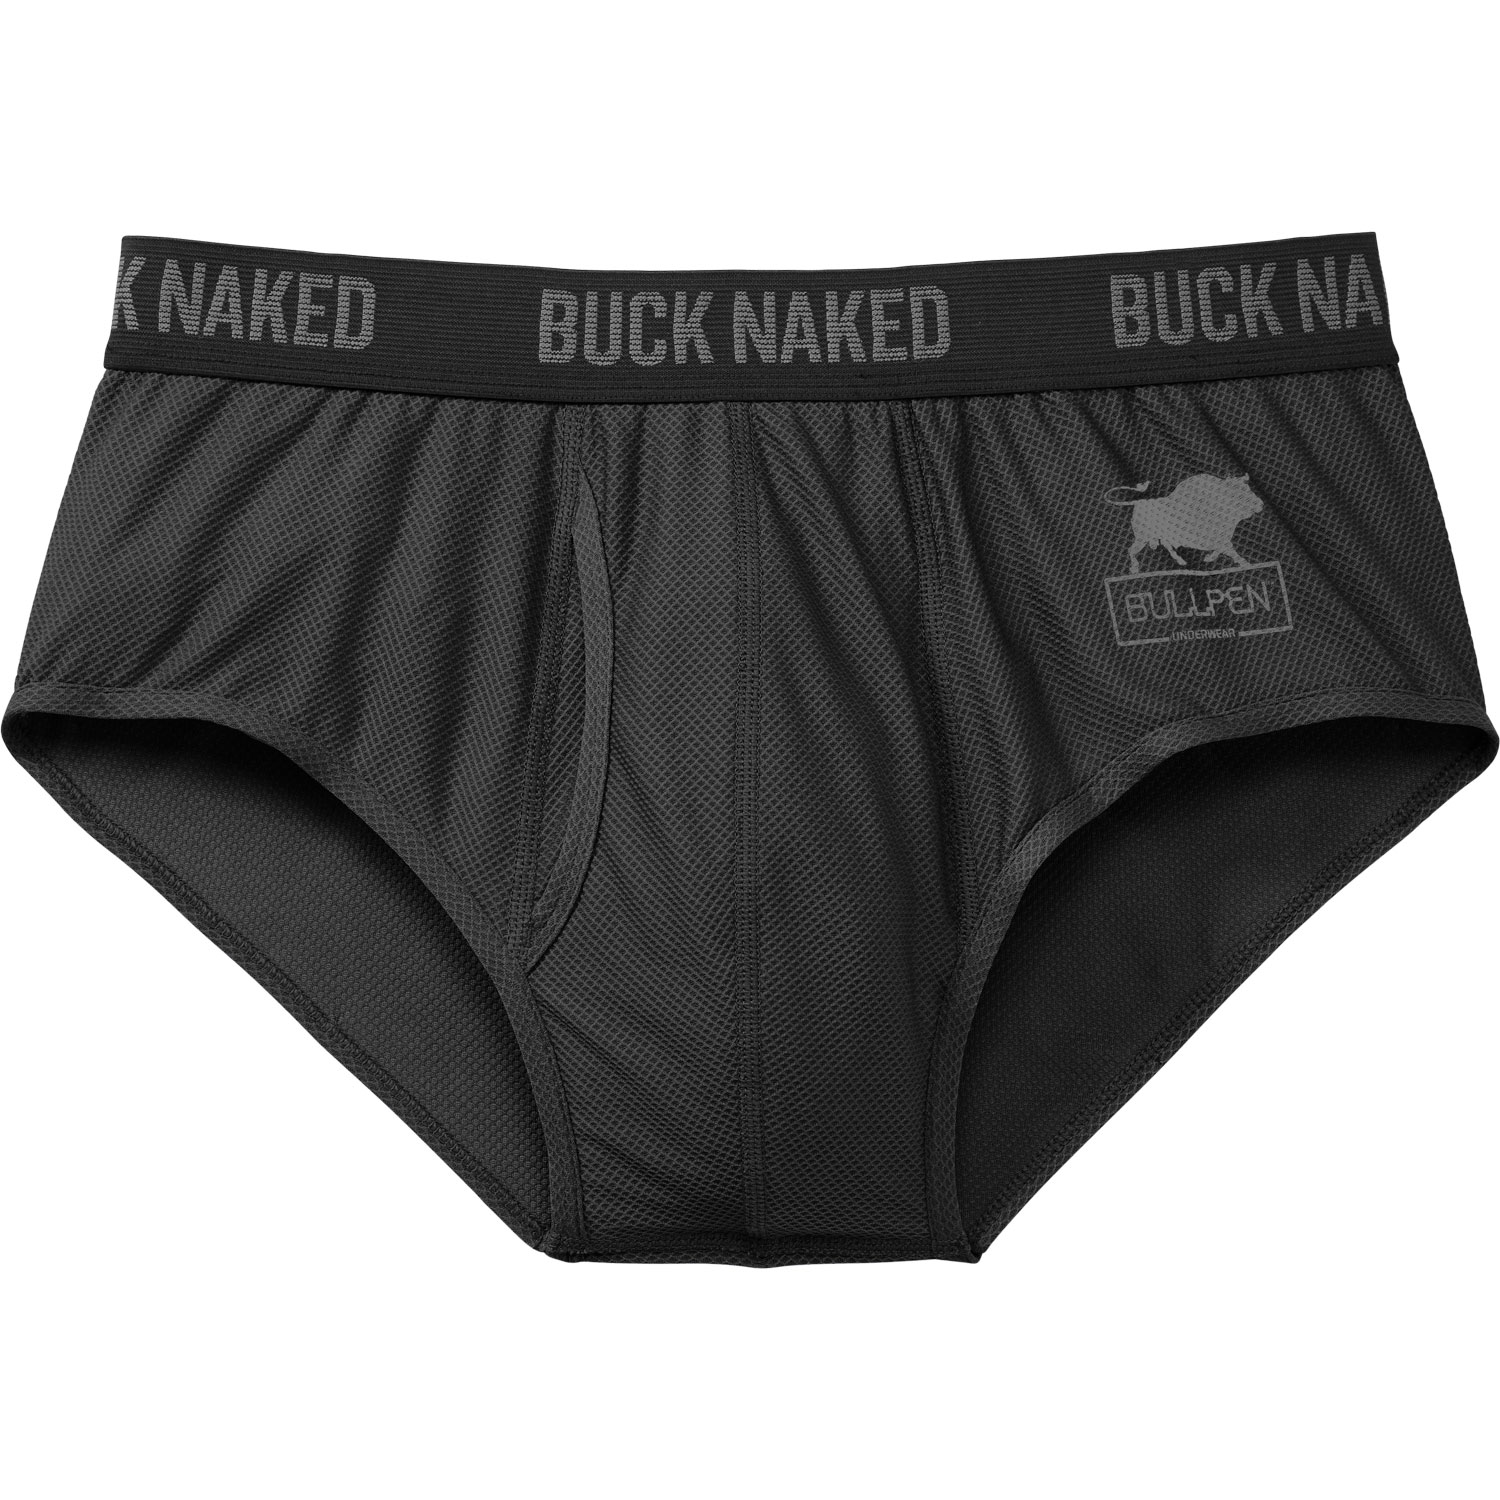 Duluth Trading Company Underwear Flash Sale! Buck Naked Men's $15 and  Women's $12. Other styles too. free shipping